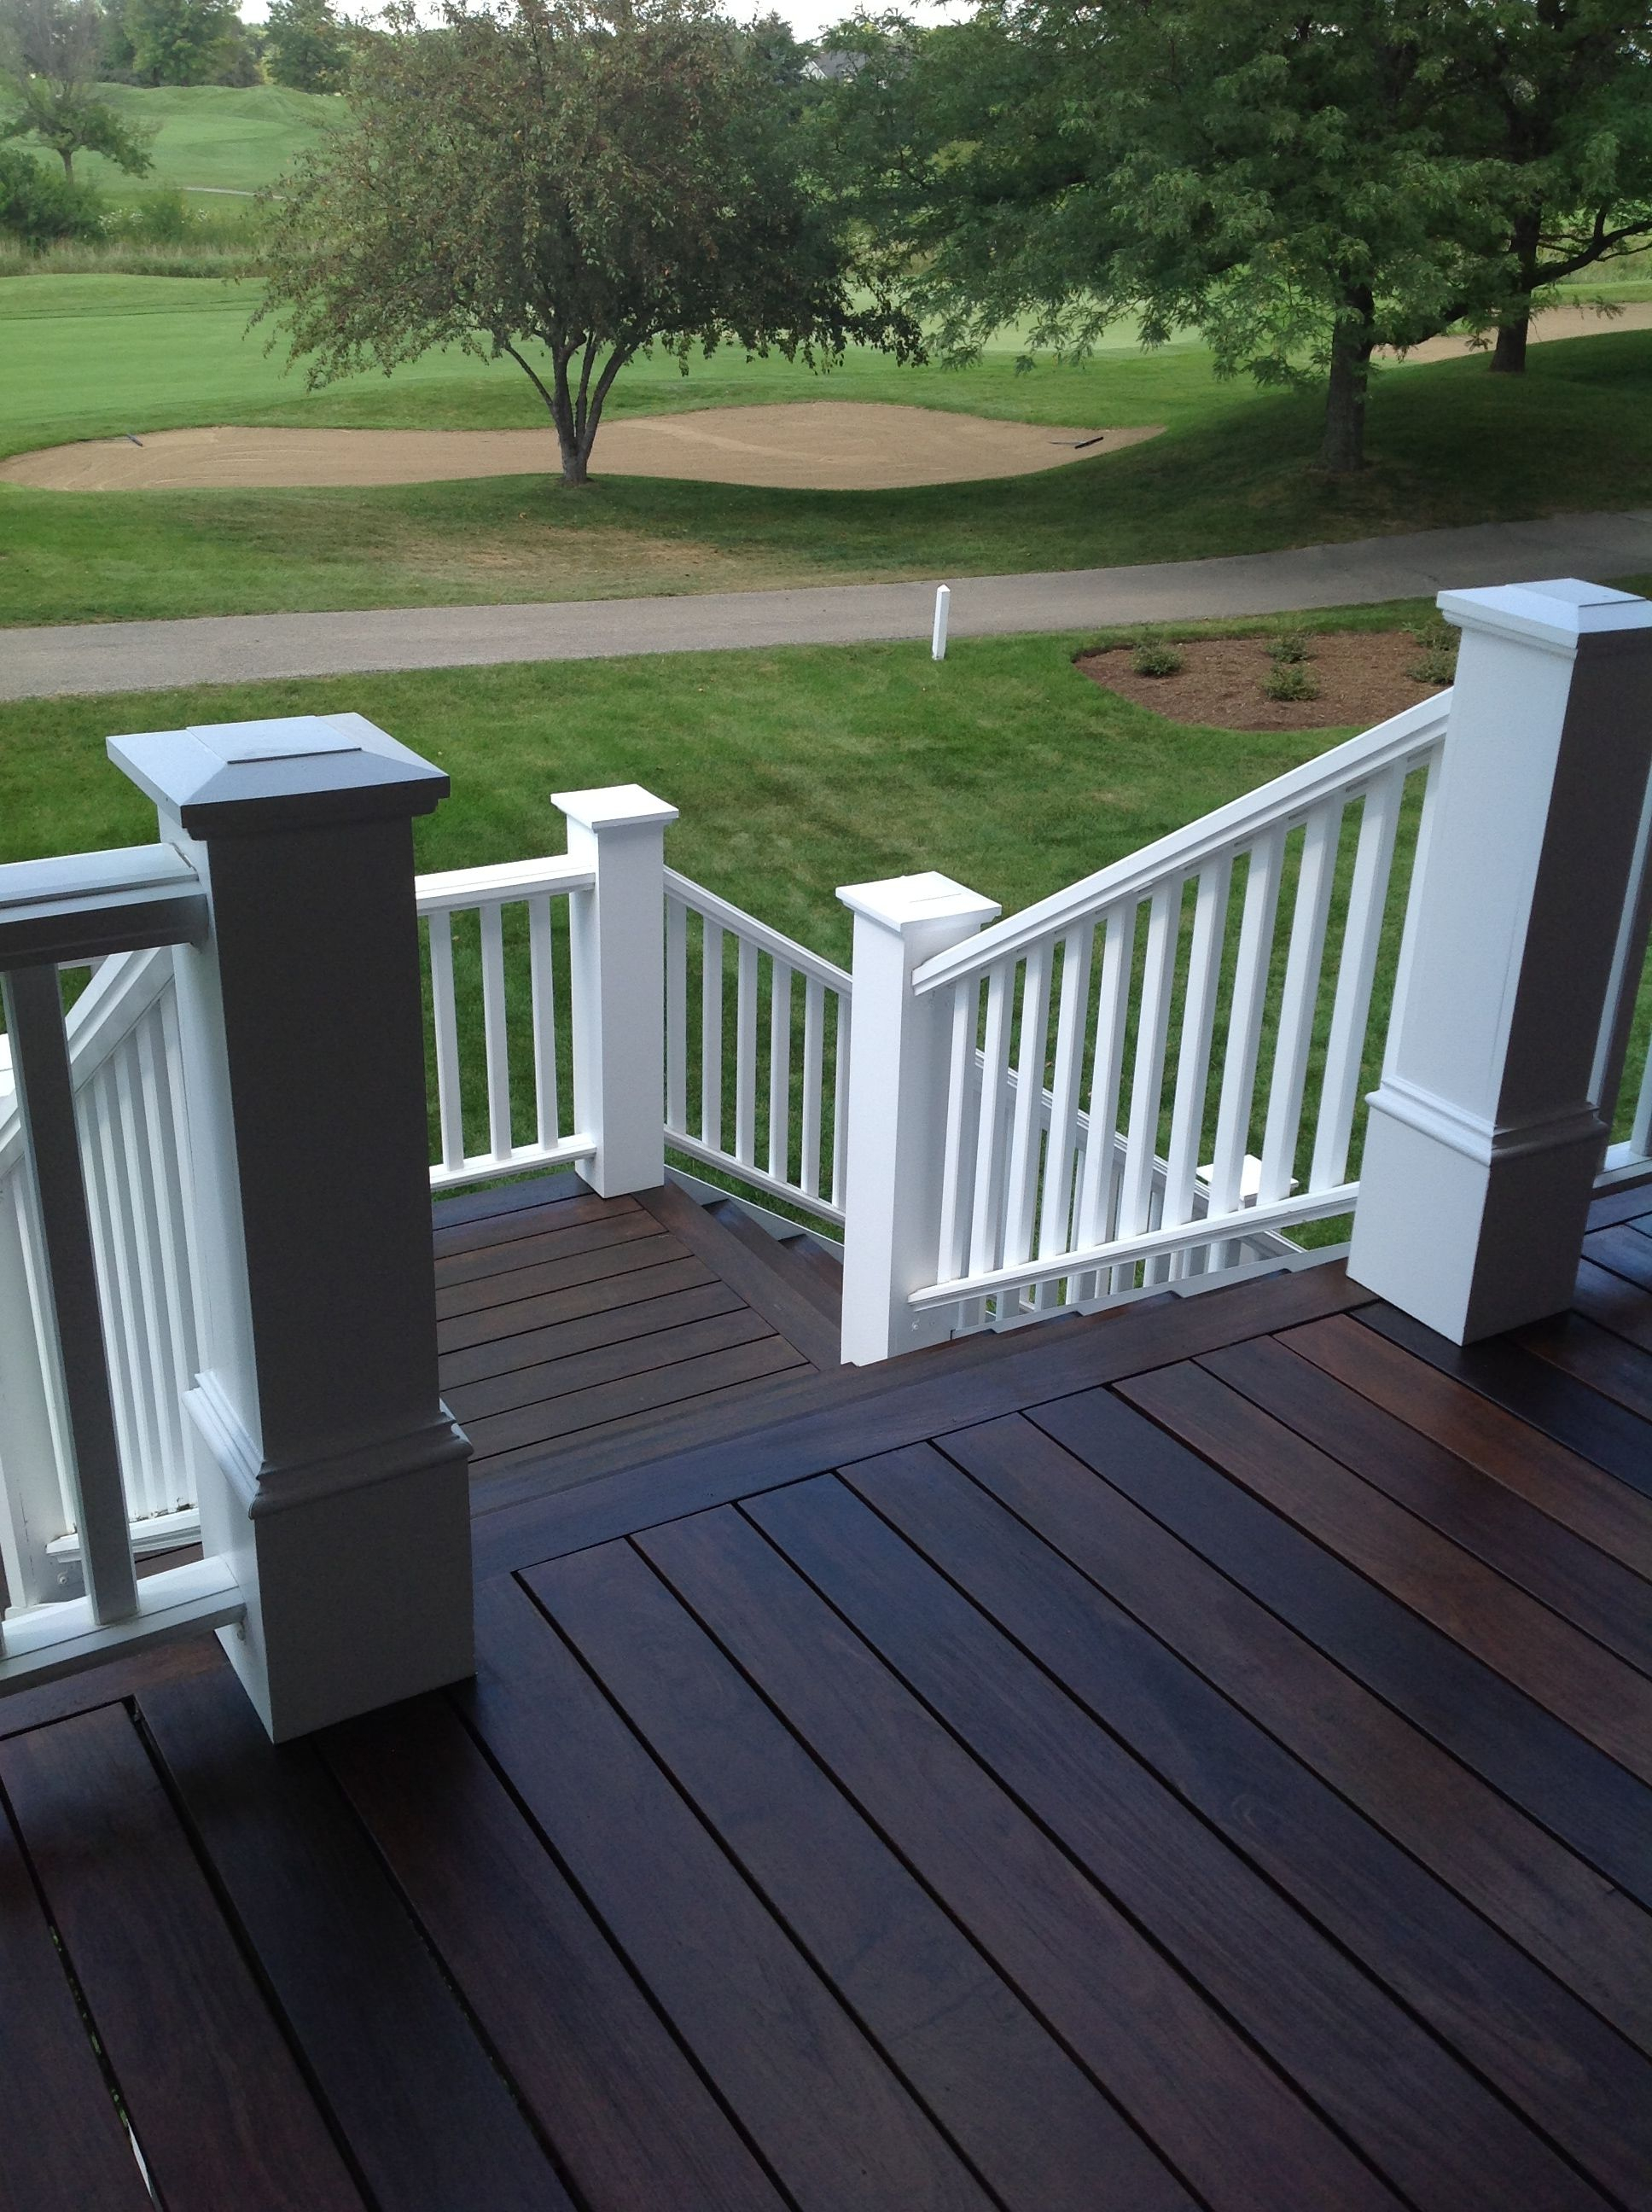 Dark Cool Deck Paint Decks And Patios In 2019 Deck Colors Deck throughout dimensions 1936 X 2592